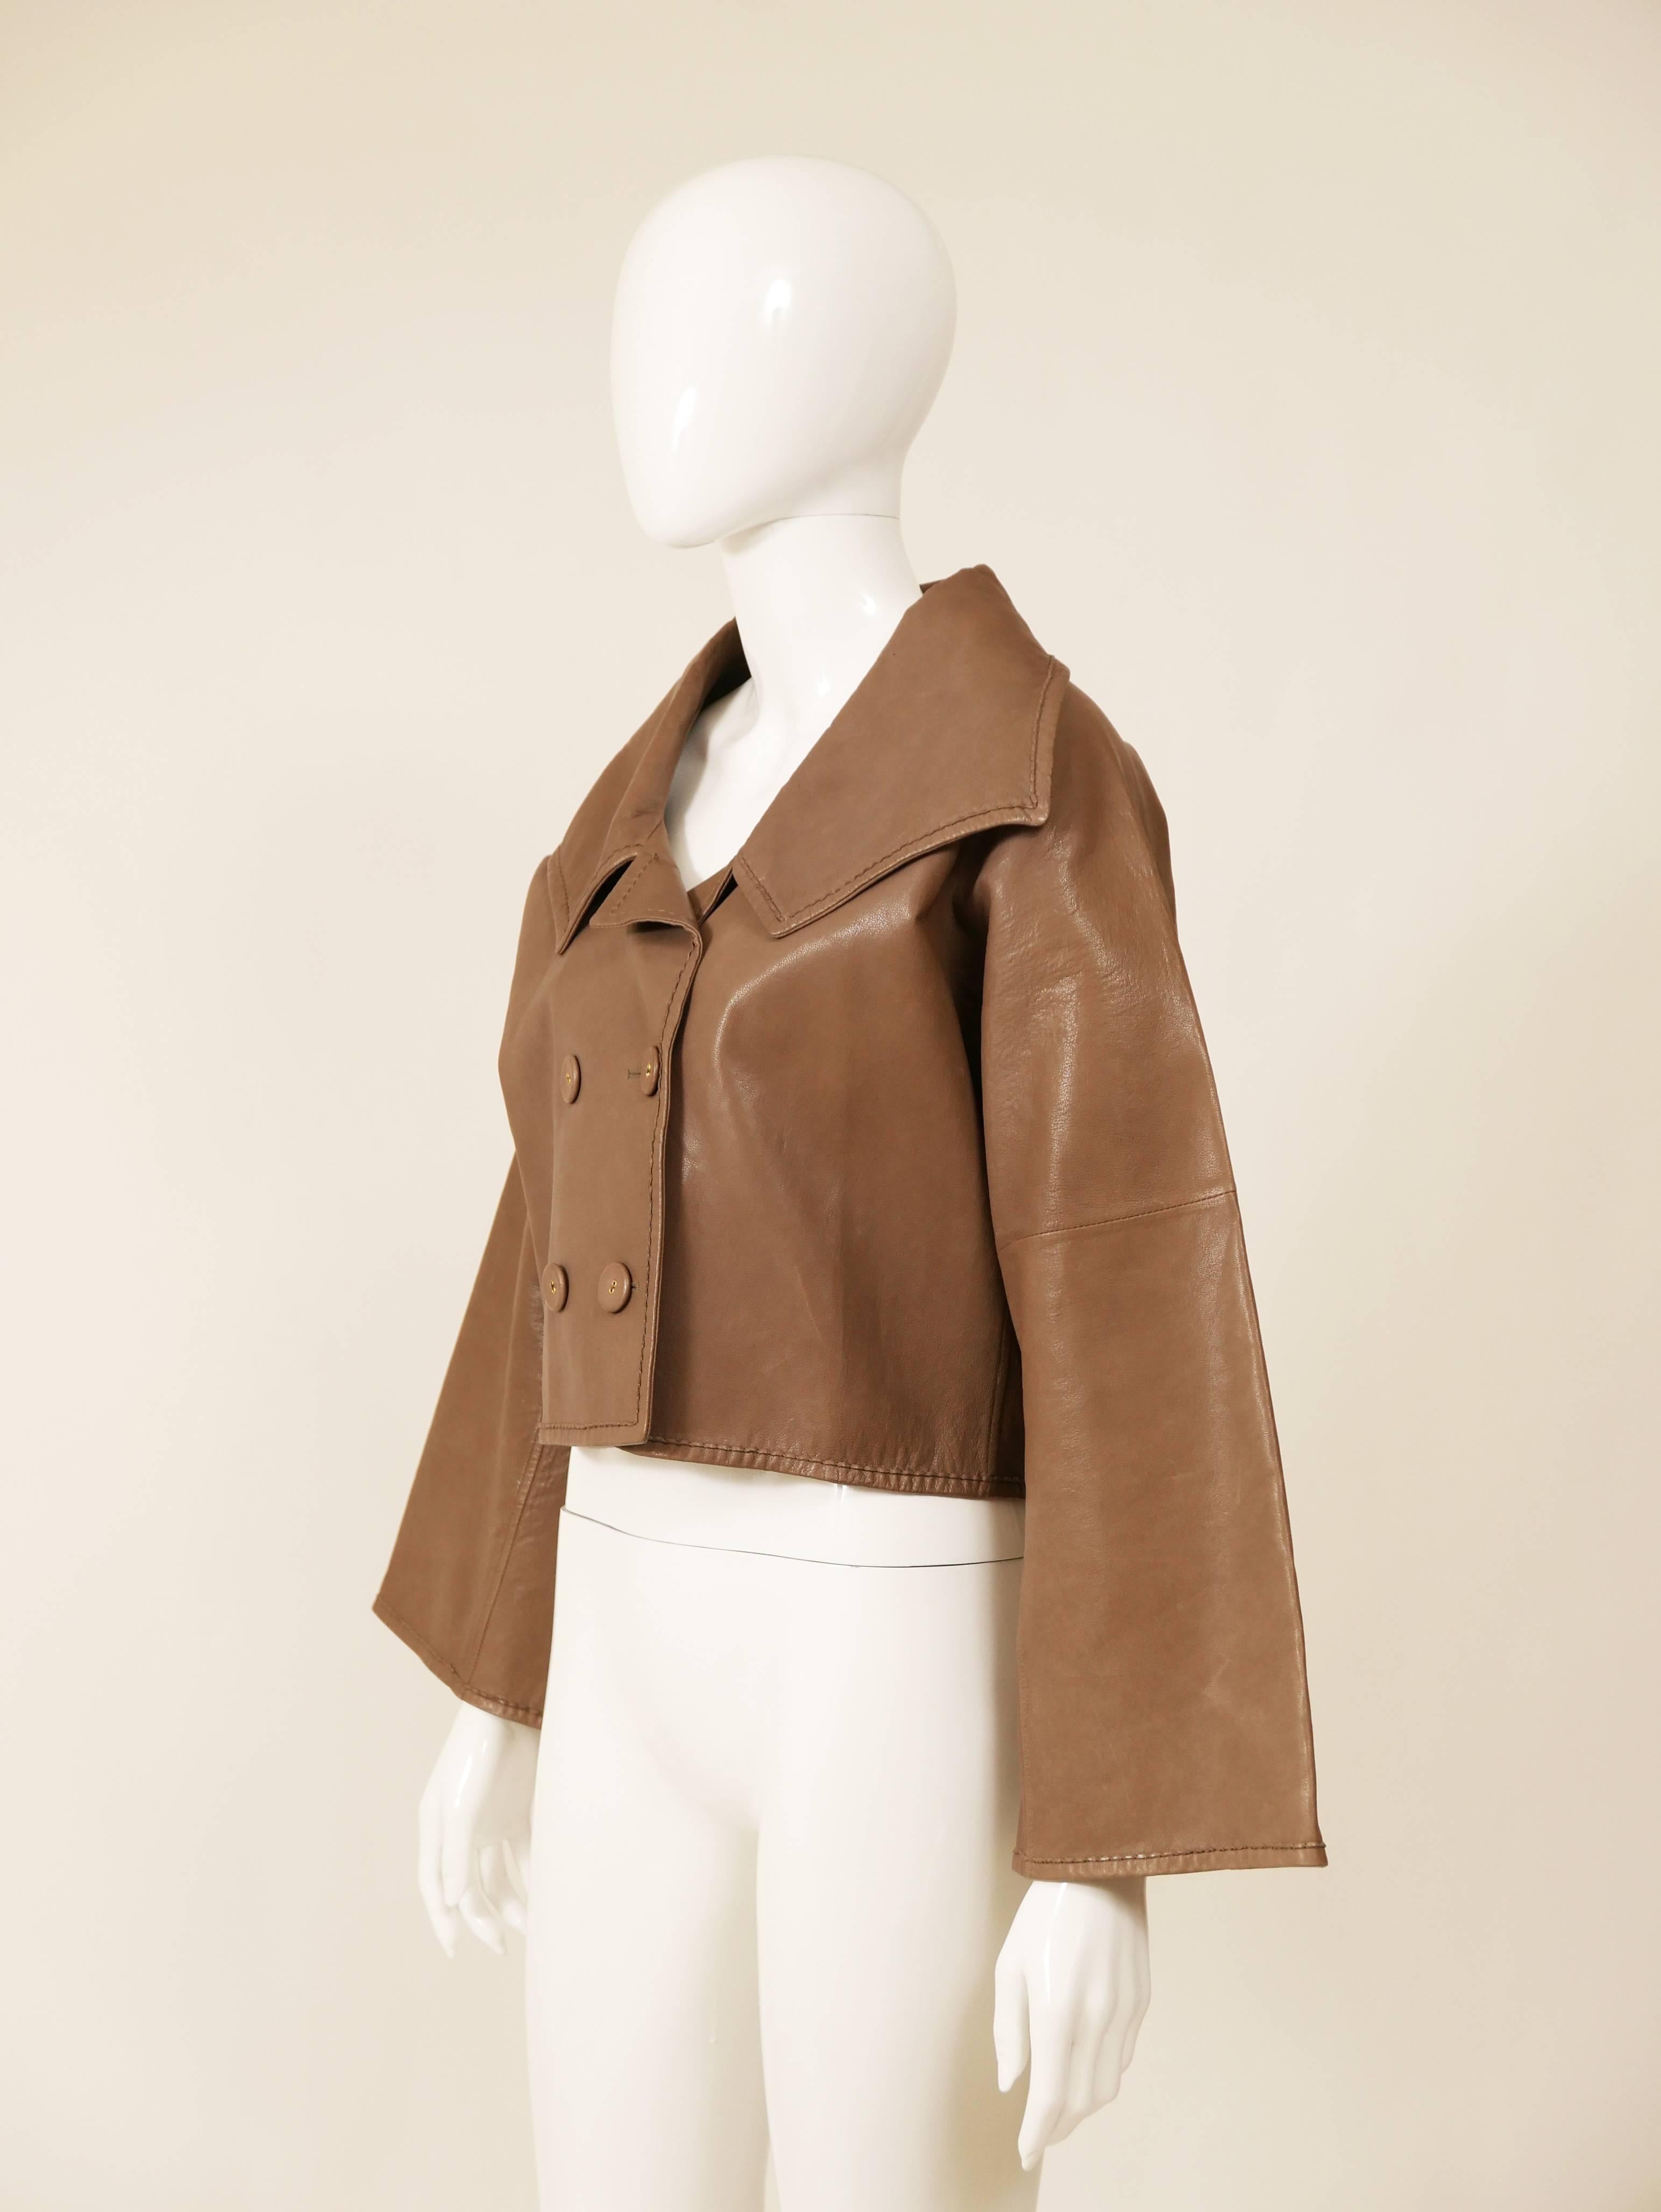 This lovely Bottega Veneta jacket is in a brown dubbed skin with silk. It has double breasted buttons closure and large collar.

very good condition

Label: Bottega Veneta - Made in Italy
Fabric: leather/silk
Color: cafe au lait brown
Code: